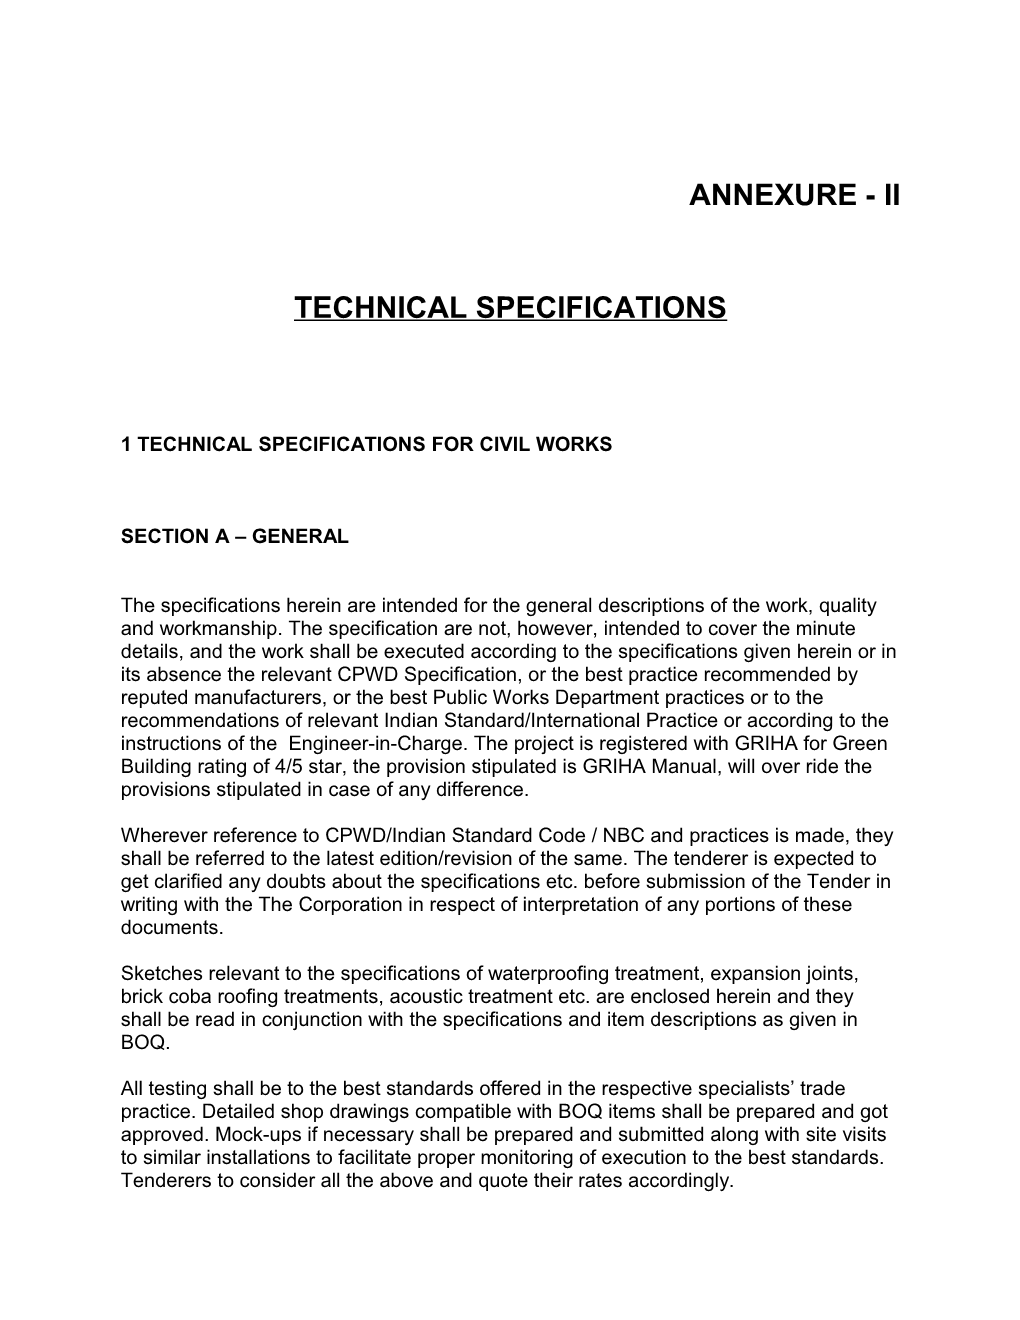 1 Technical Specifications for Civil Works